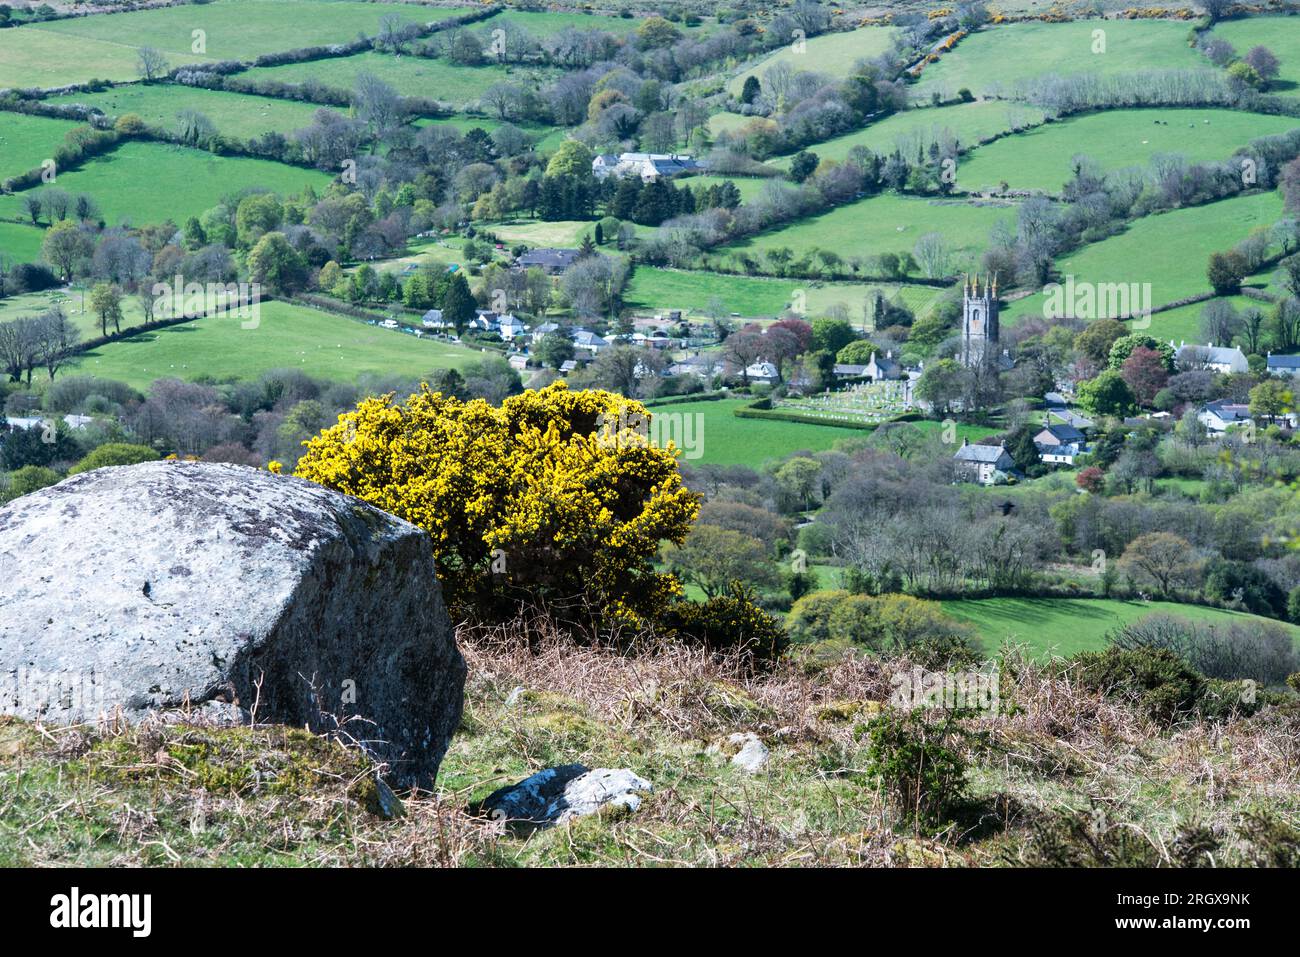 Looking down on the well known village of Widecombe in the Moor from Bonehill Rocks on Dartmoor on a sunny April day. Stock Photo